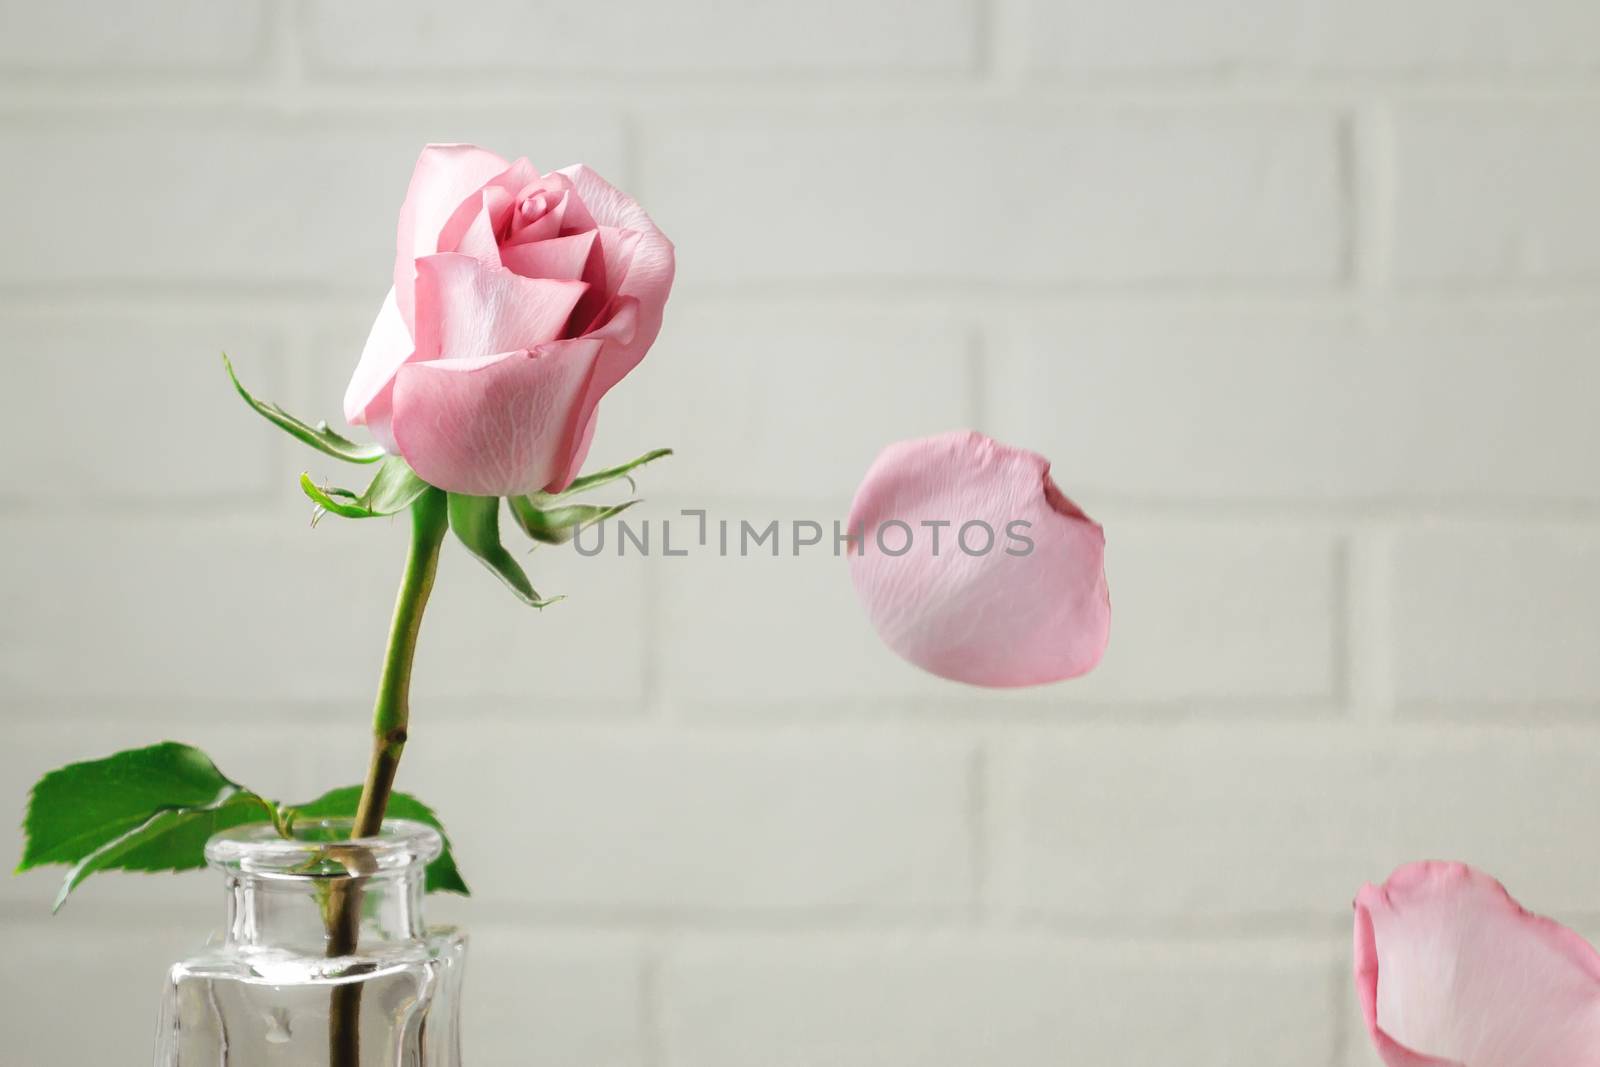 Pink rose in a vase with falling petals against the background of a white wall. Tenderness, fragility, loneliness, romance concept.